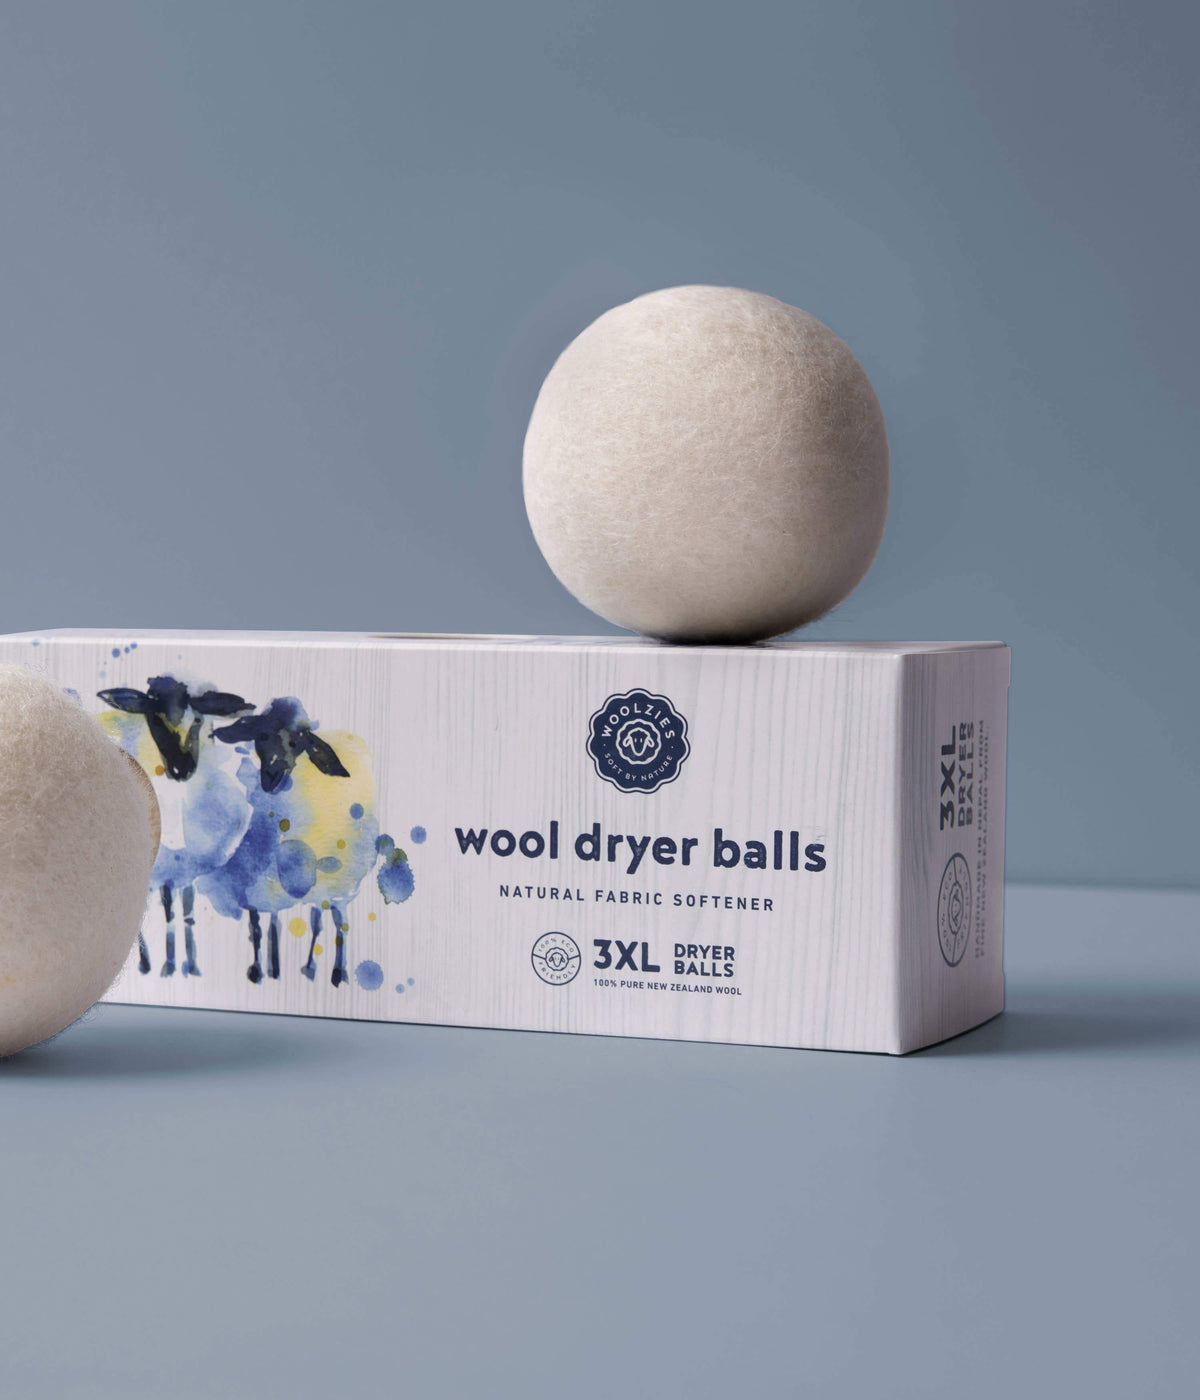 A package of Woolzies Wool Dryer Balls - Set of 3, labeled "natural fabric softener," is accompanied by one ball on top and another beside it. The box is decorated with a watercolor-style image of sheep.